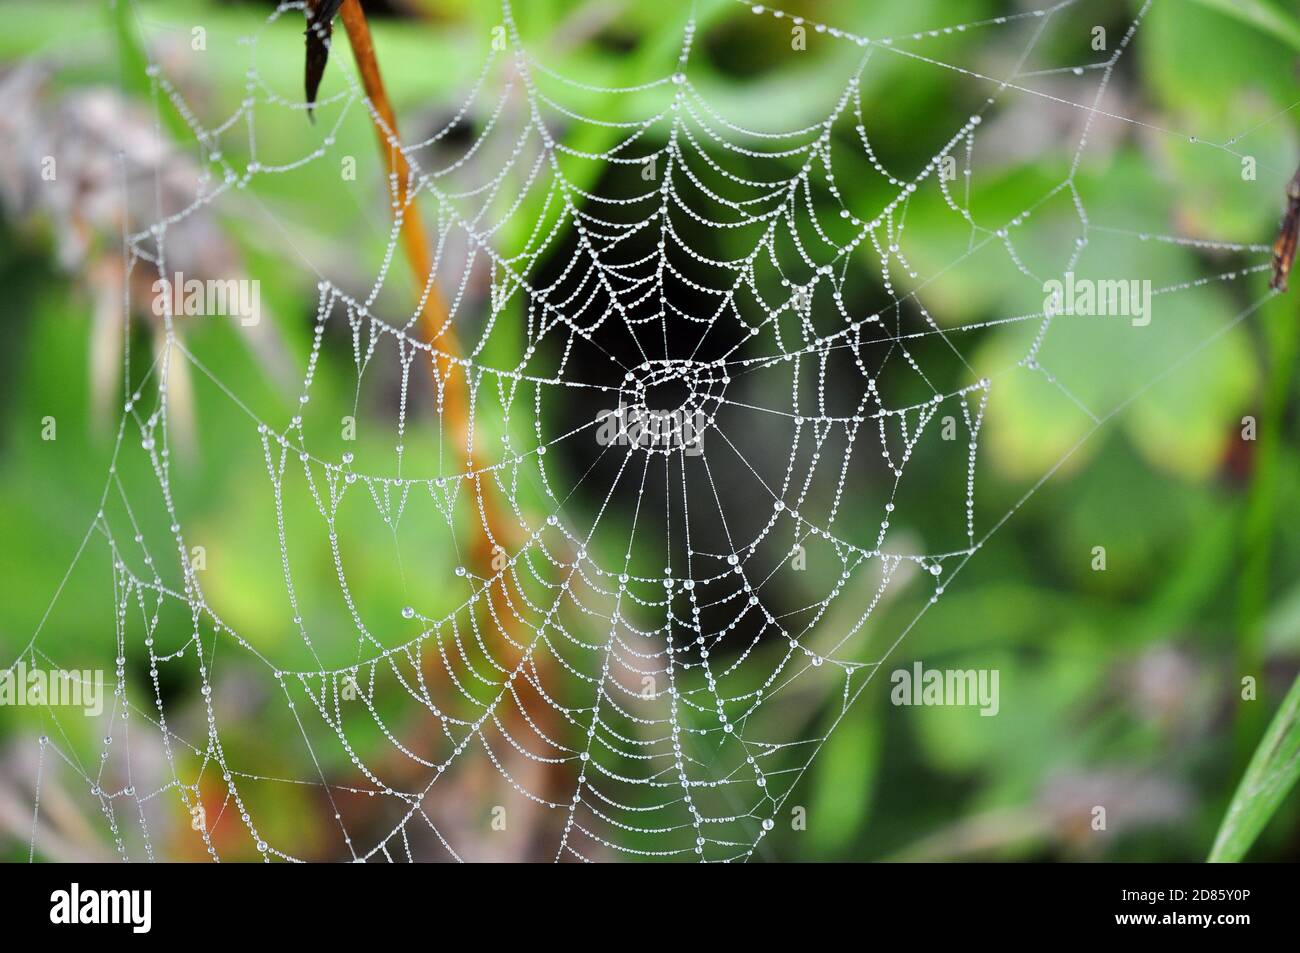 Dewdrops in a spiders web hanging in vegetation Stock Photo